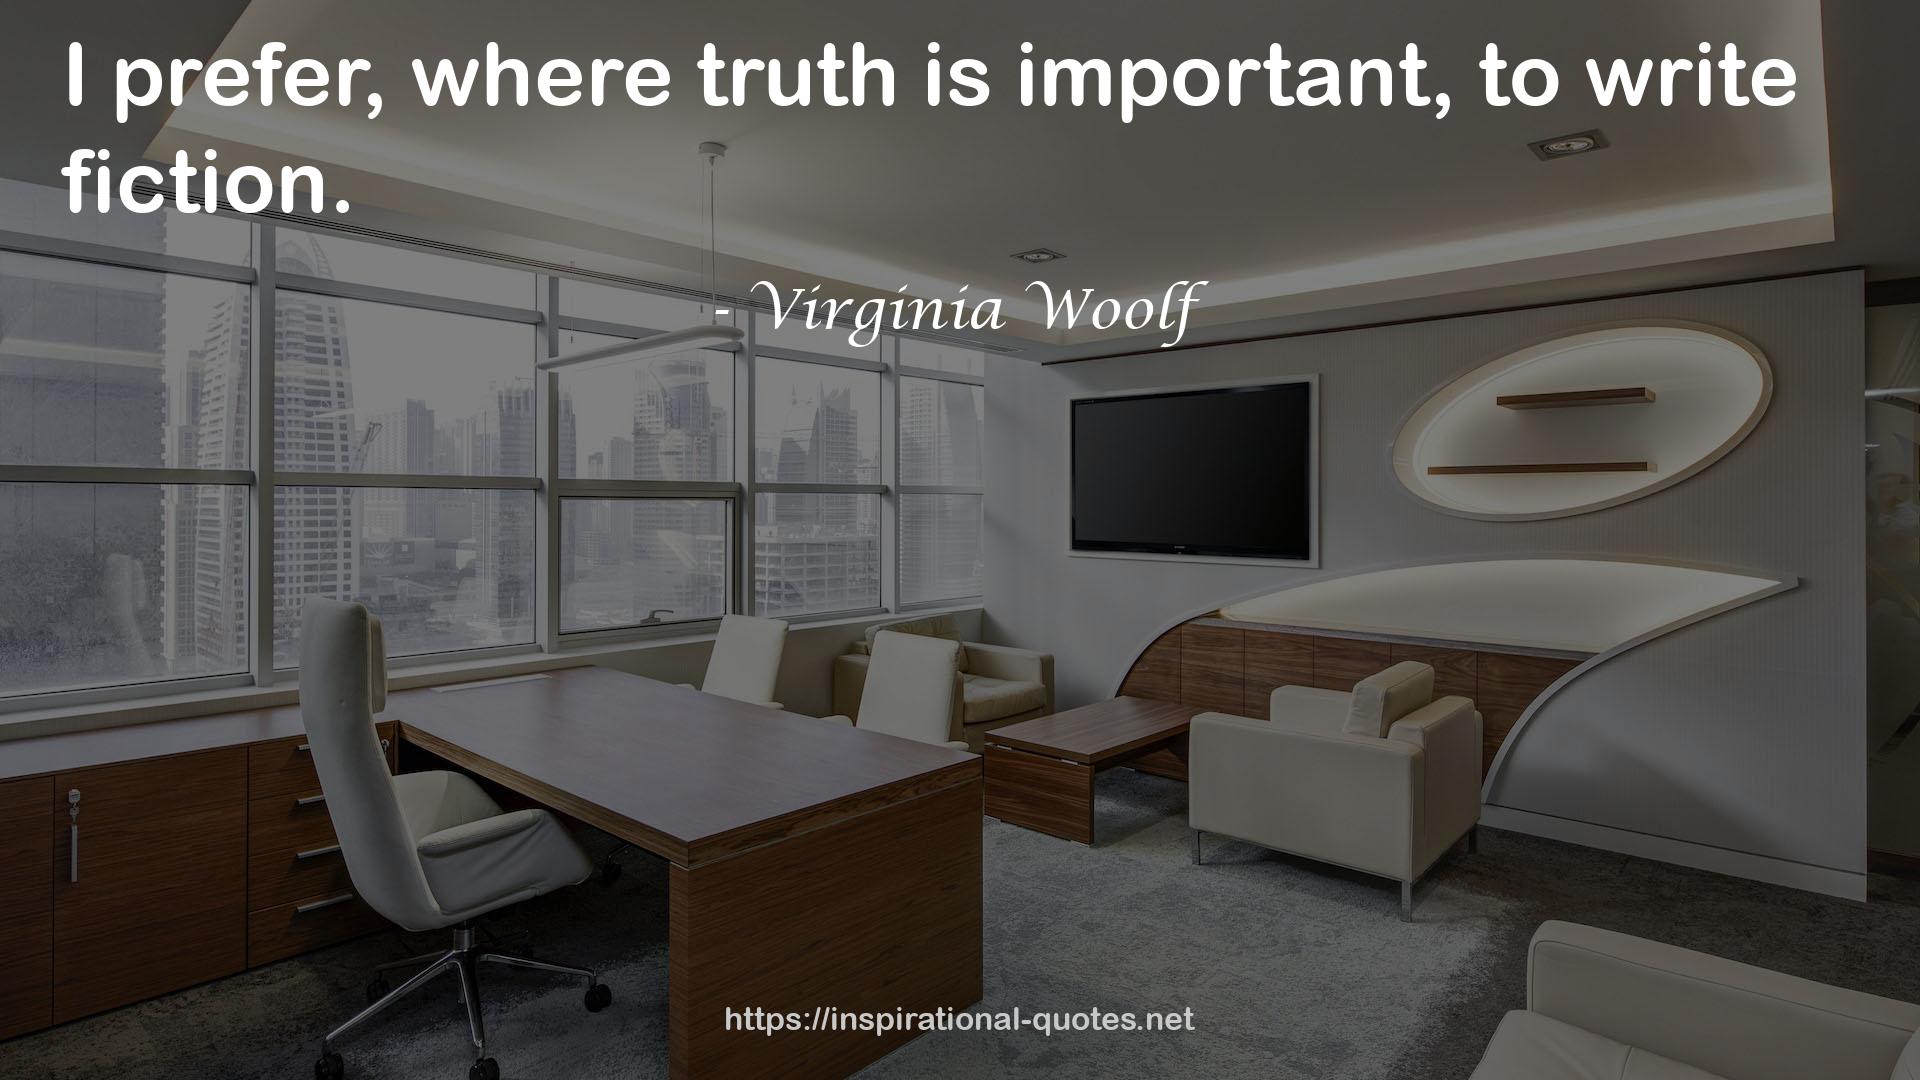 Virginia Woolf QUOTES